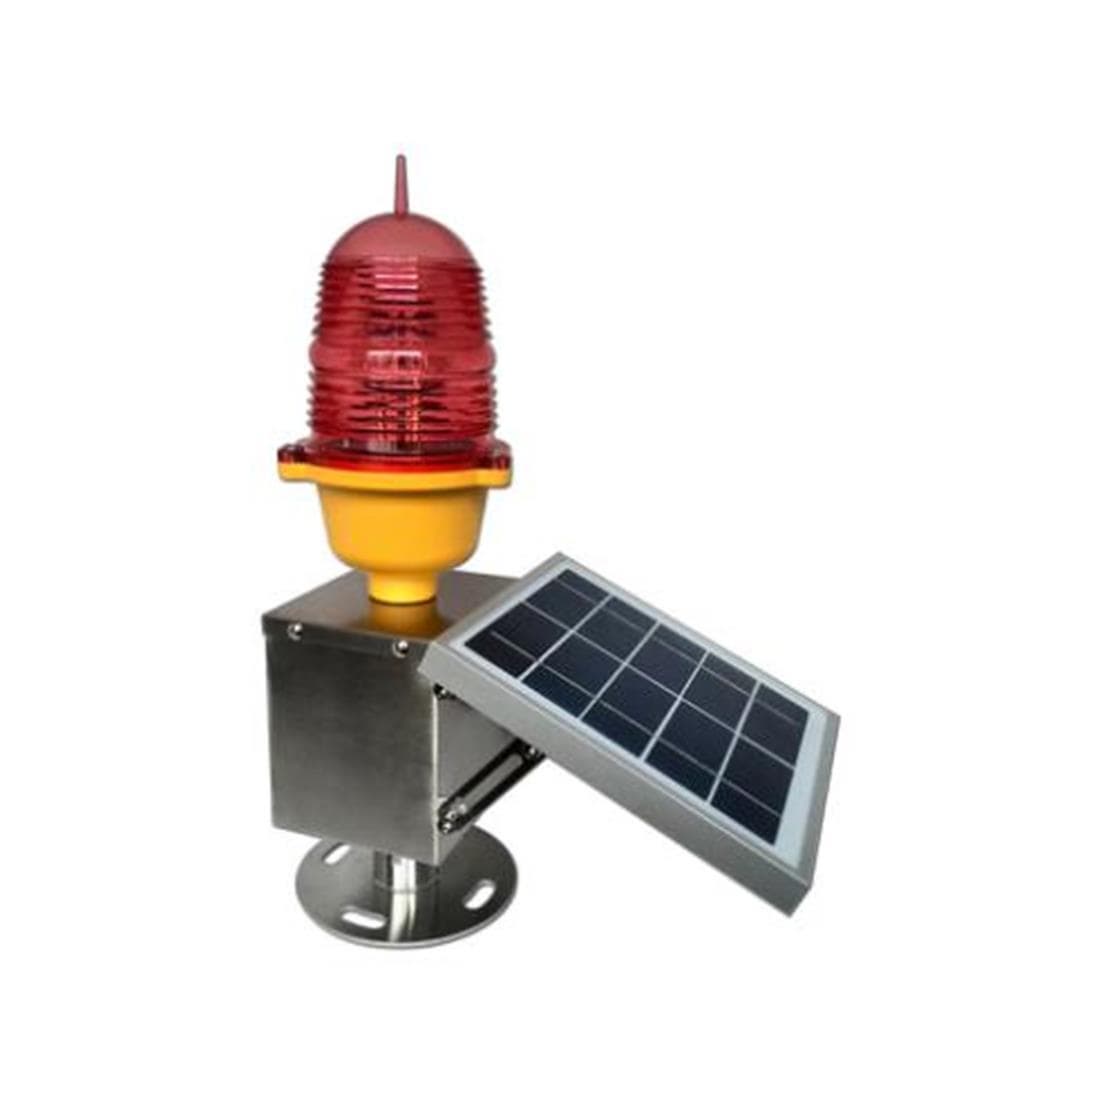 Low Intensity Solar Powered Obstruction Light for building